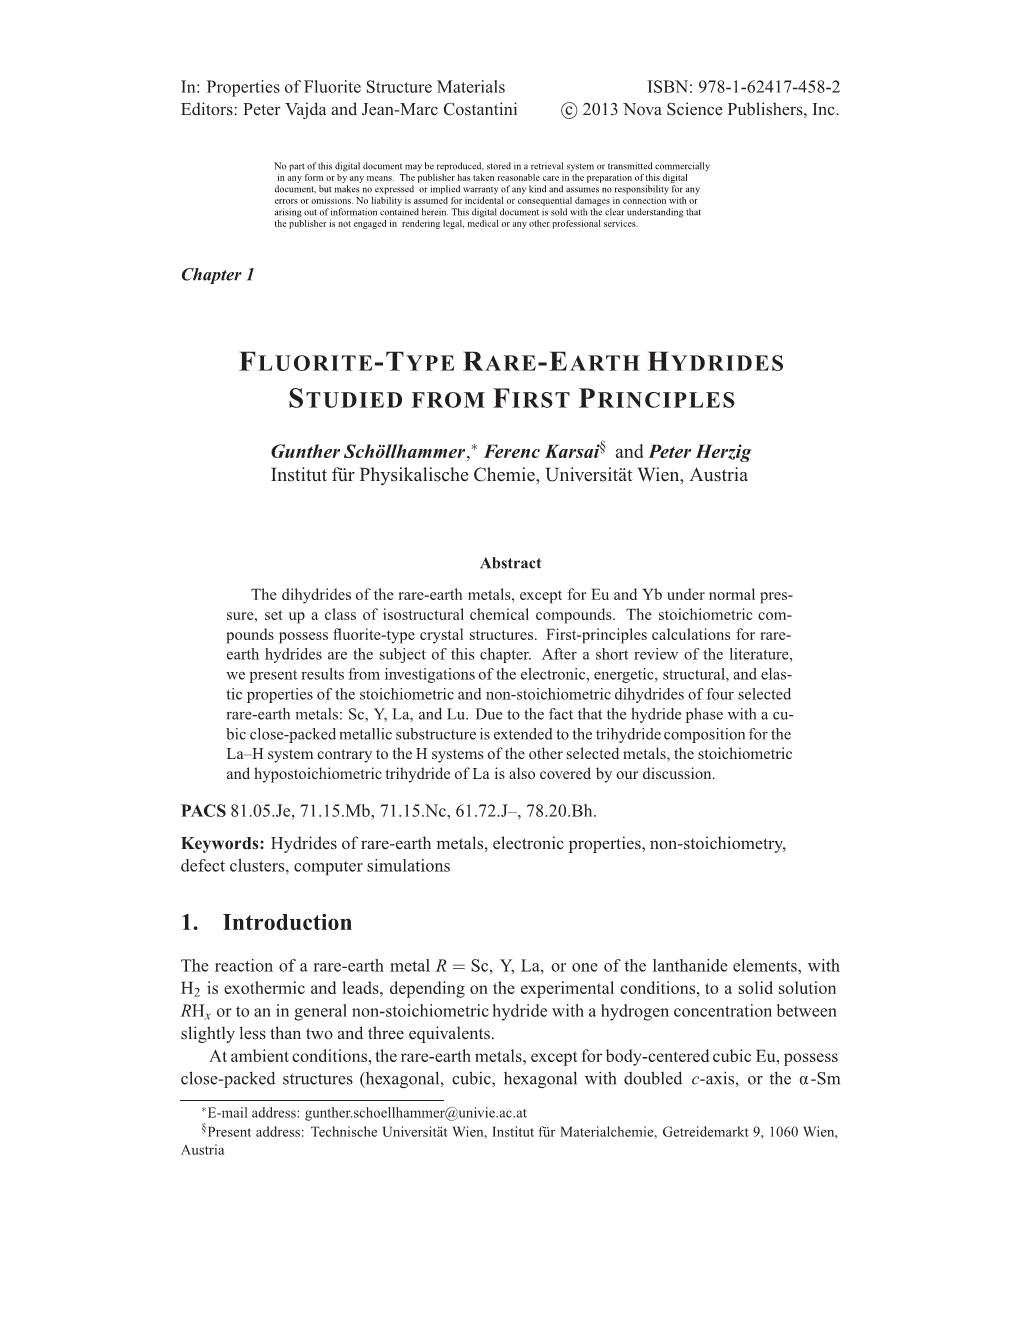 Fluorite-Type Rare-Earth Hydrides Studied from First Principles